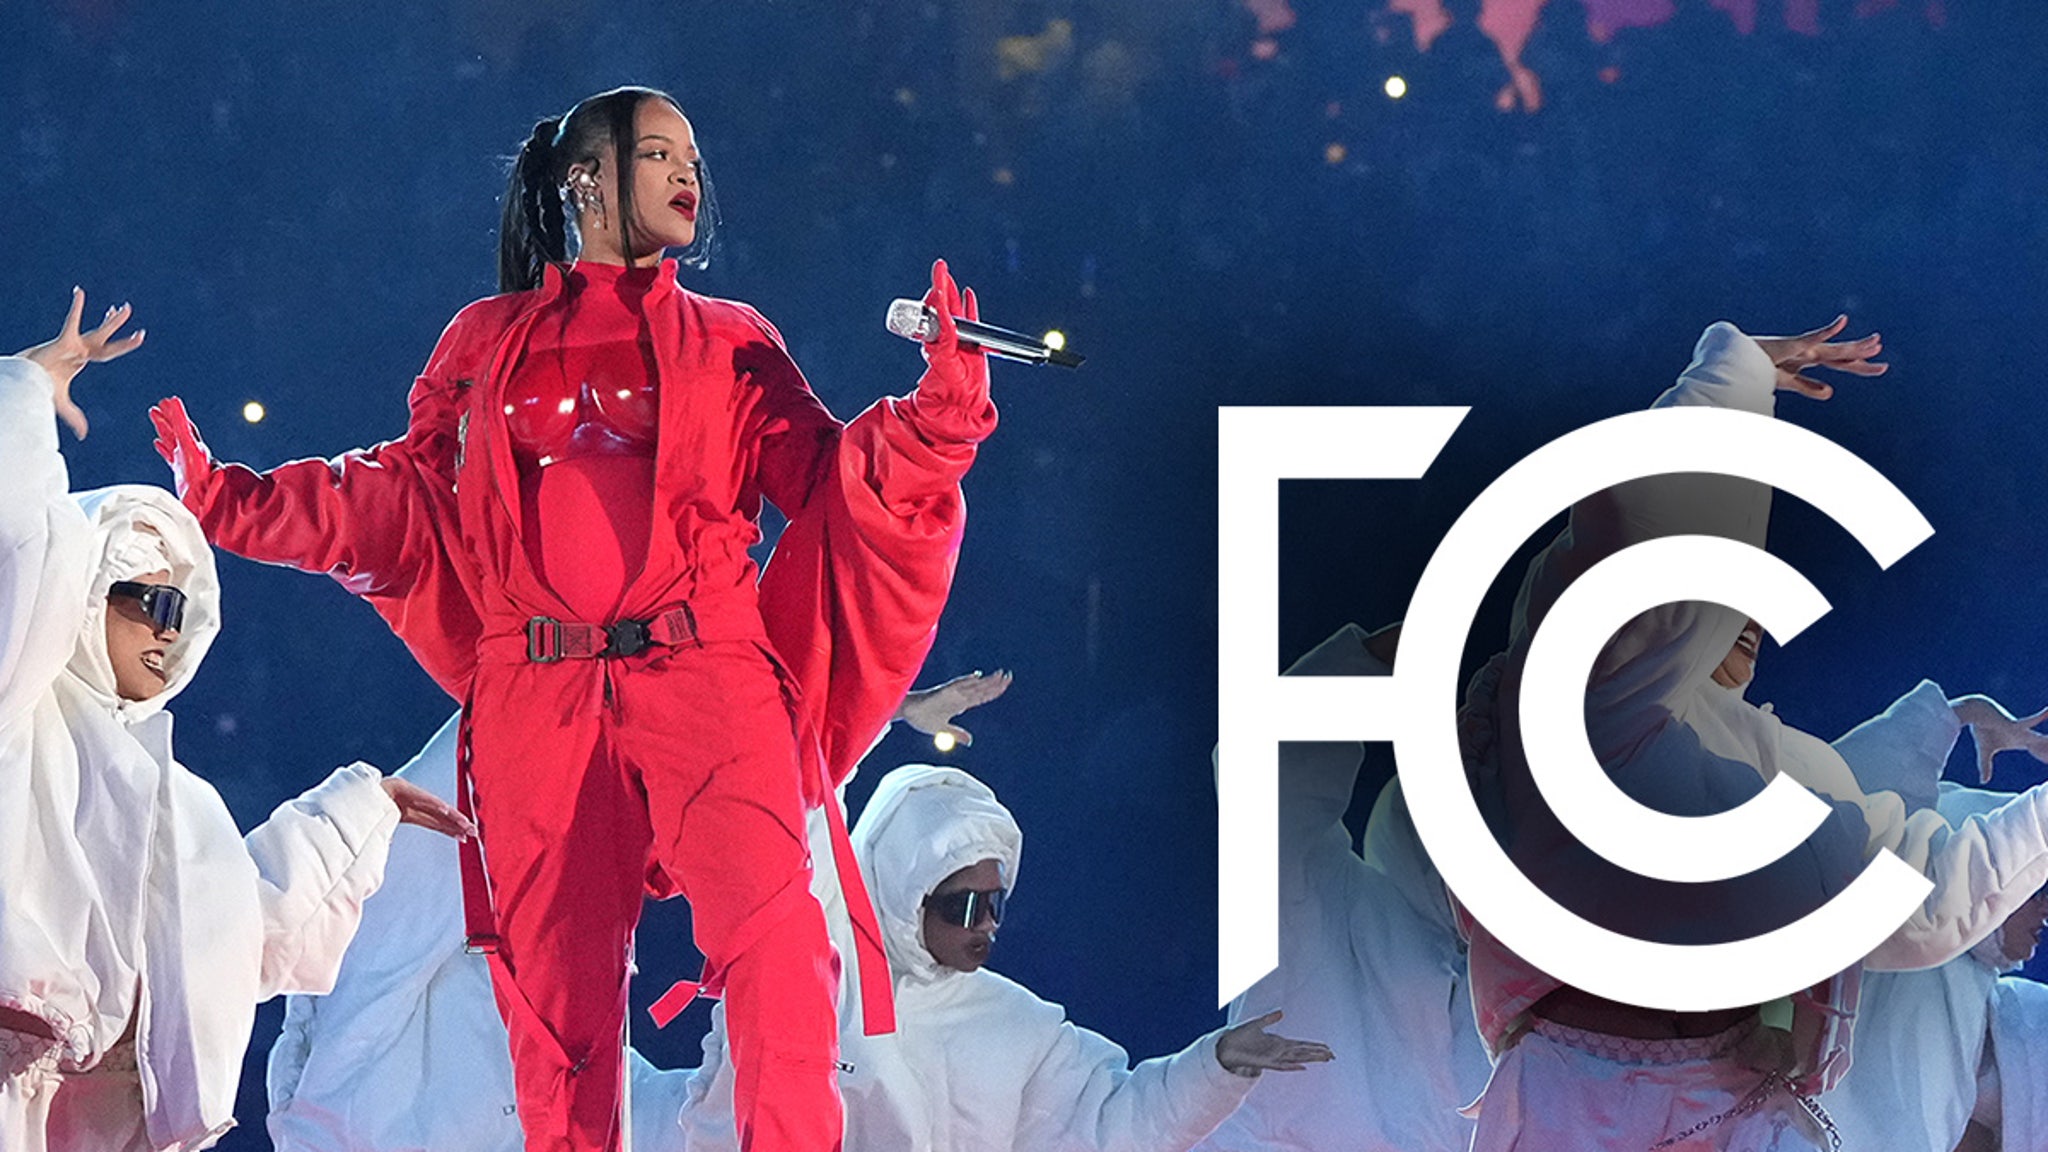 Rihanna’s Super Bowl Halftime Show Generates 103 FCC Complaints For Being Too Sexual